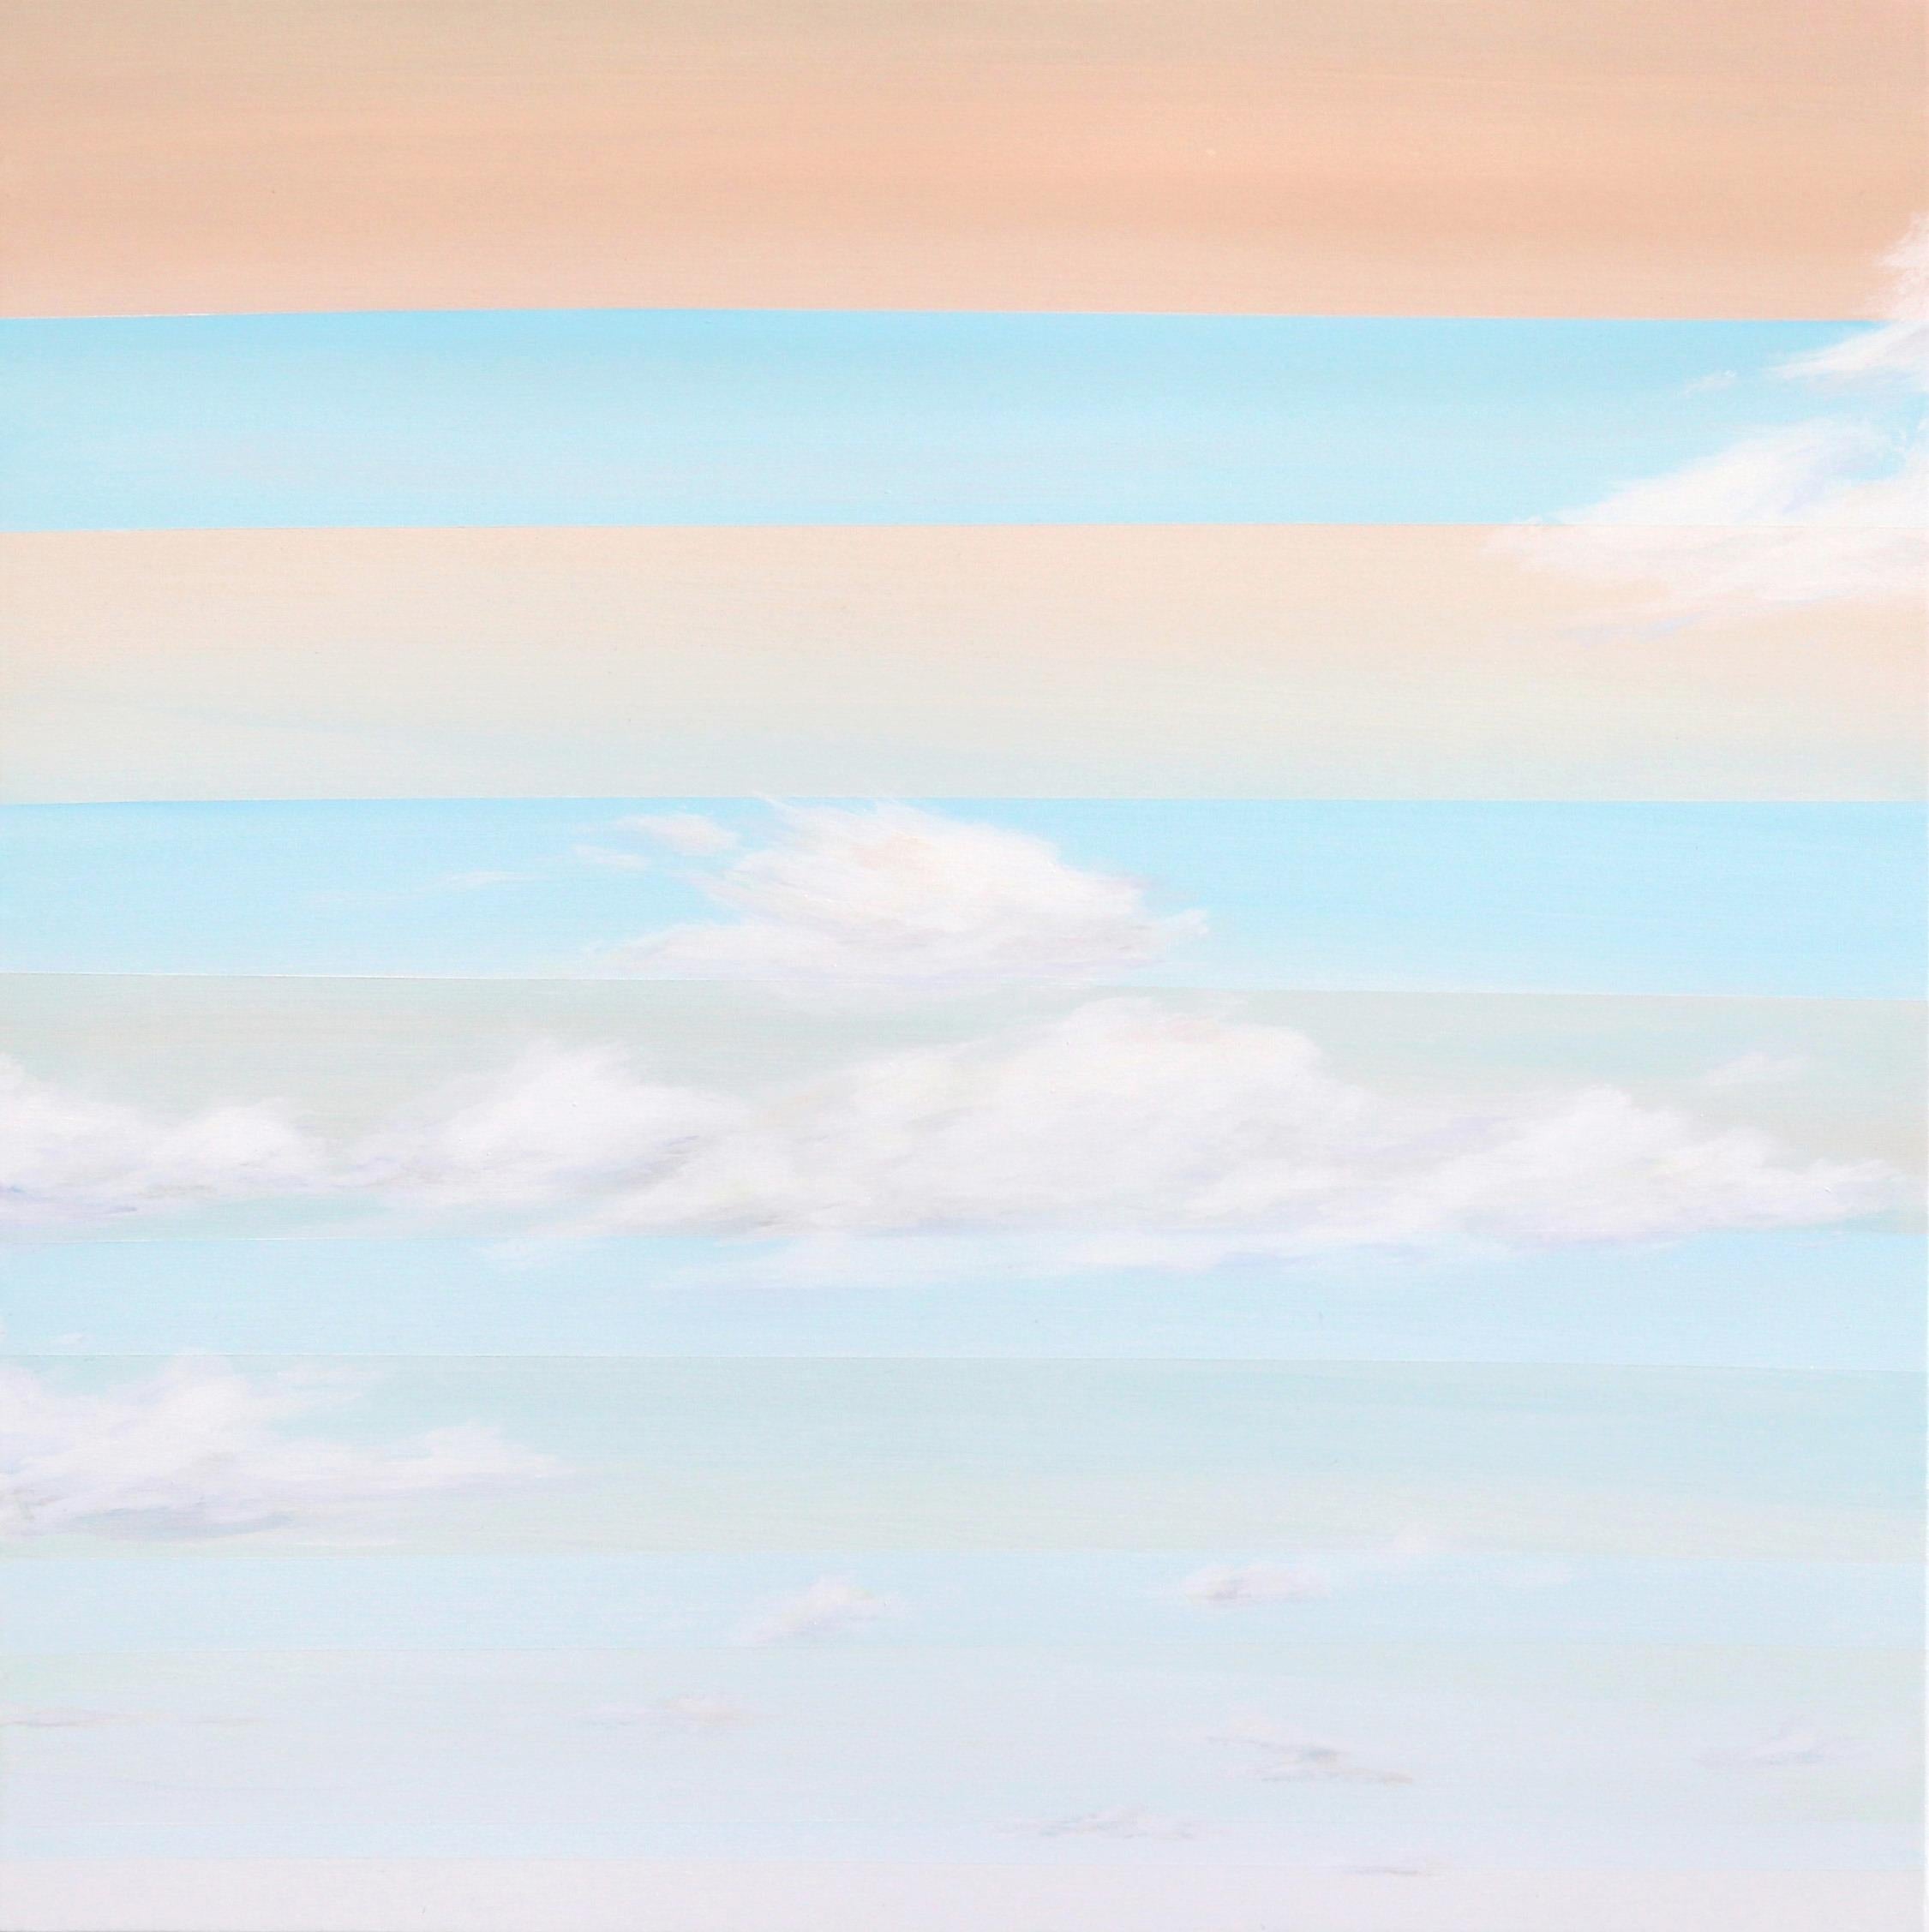 Morning Breeze 2 - Original Soft Sky Painting with Geometric Accents